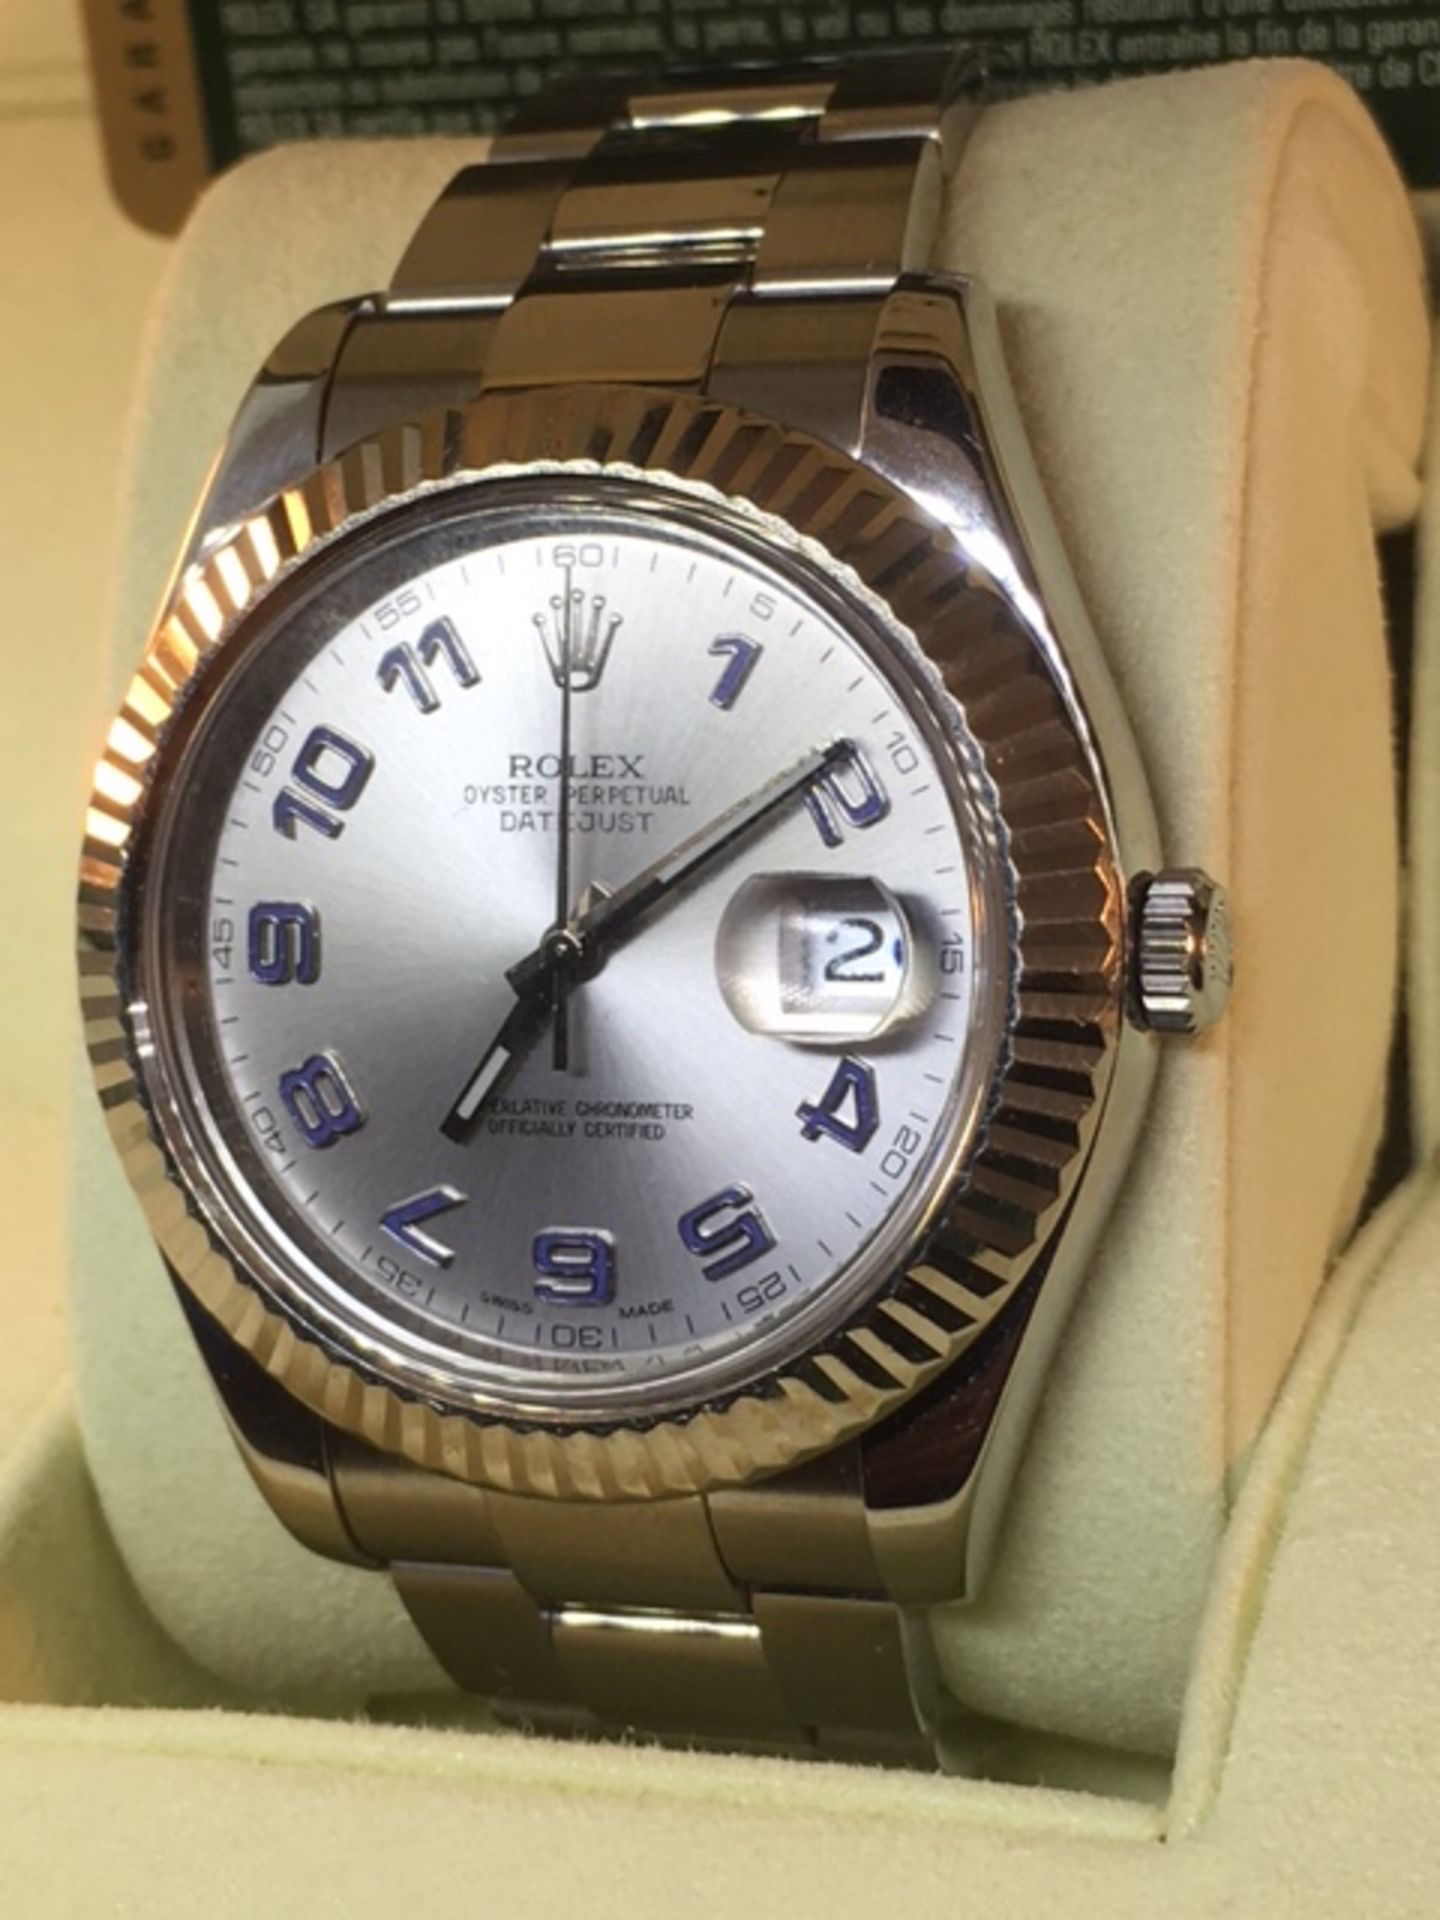 *NEXT BID WINS* Rolex Datejust 2 stainless steel with white gold fluted bezel - Image 2 of 3